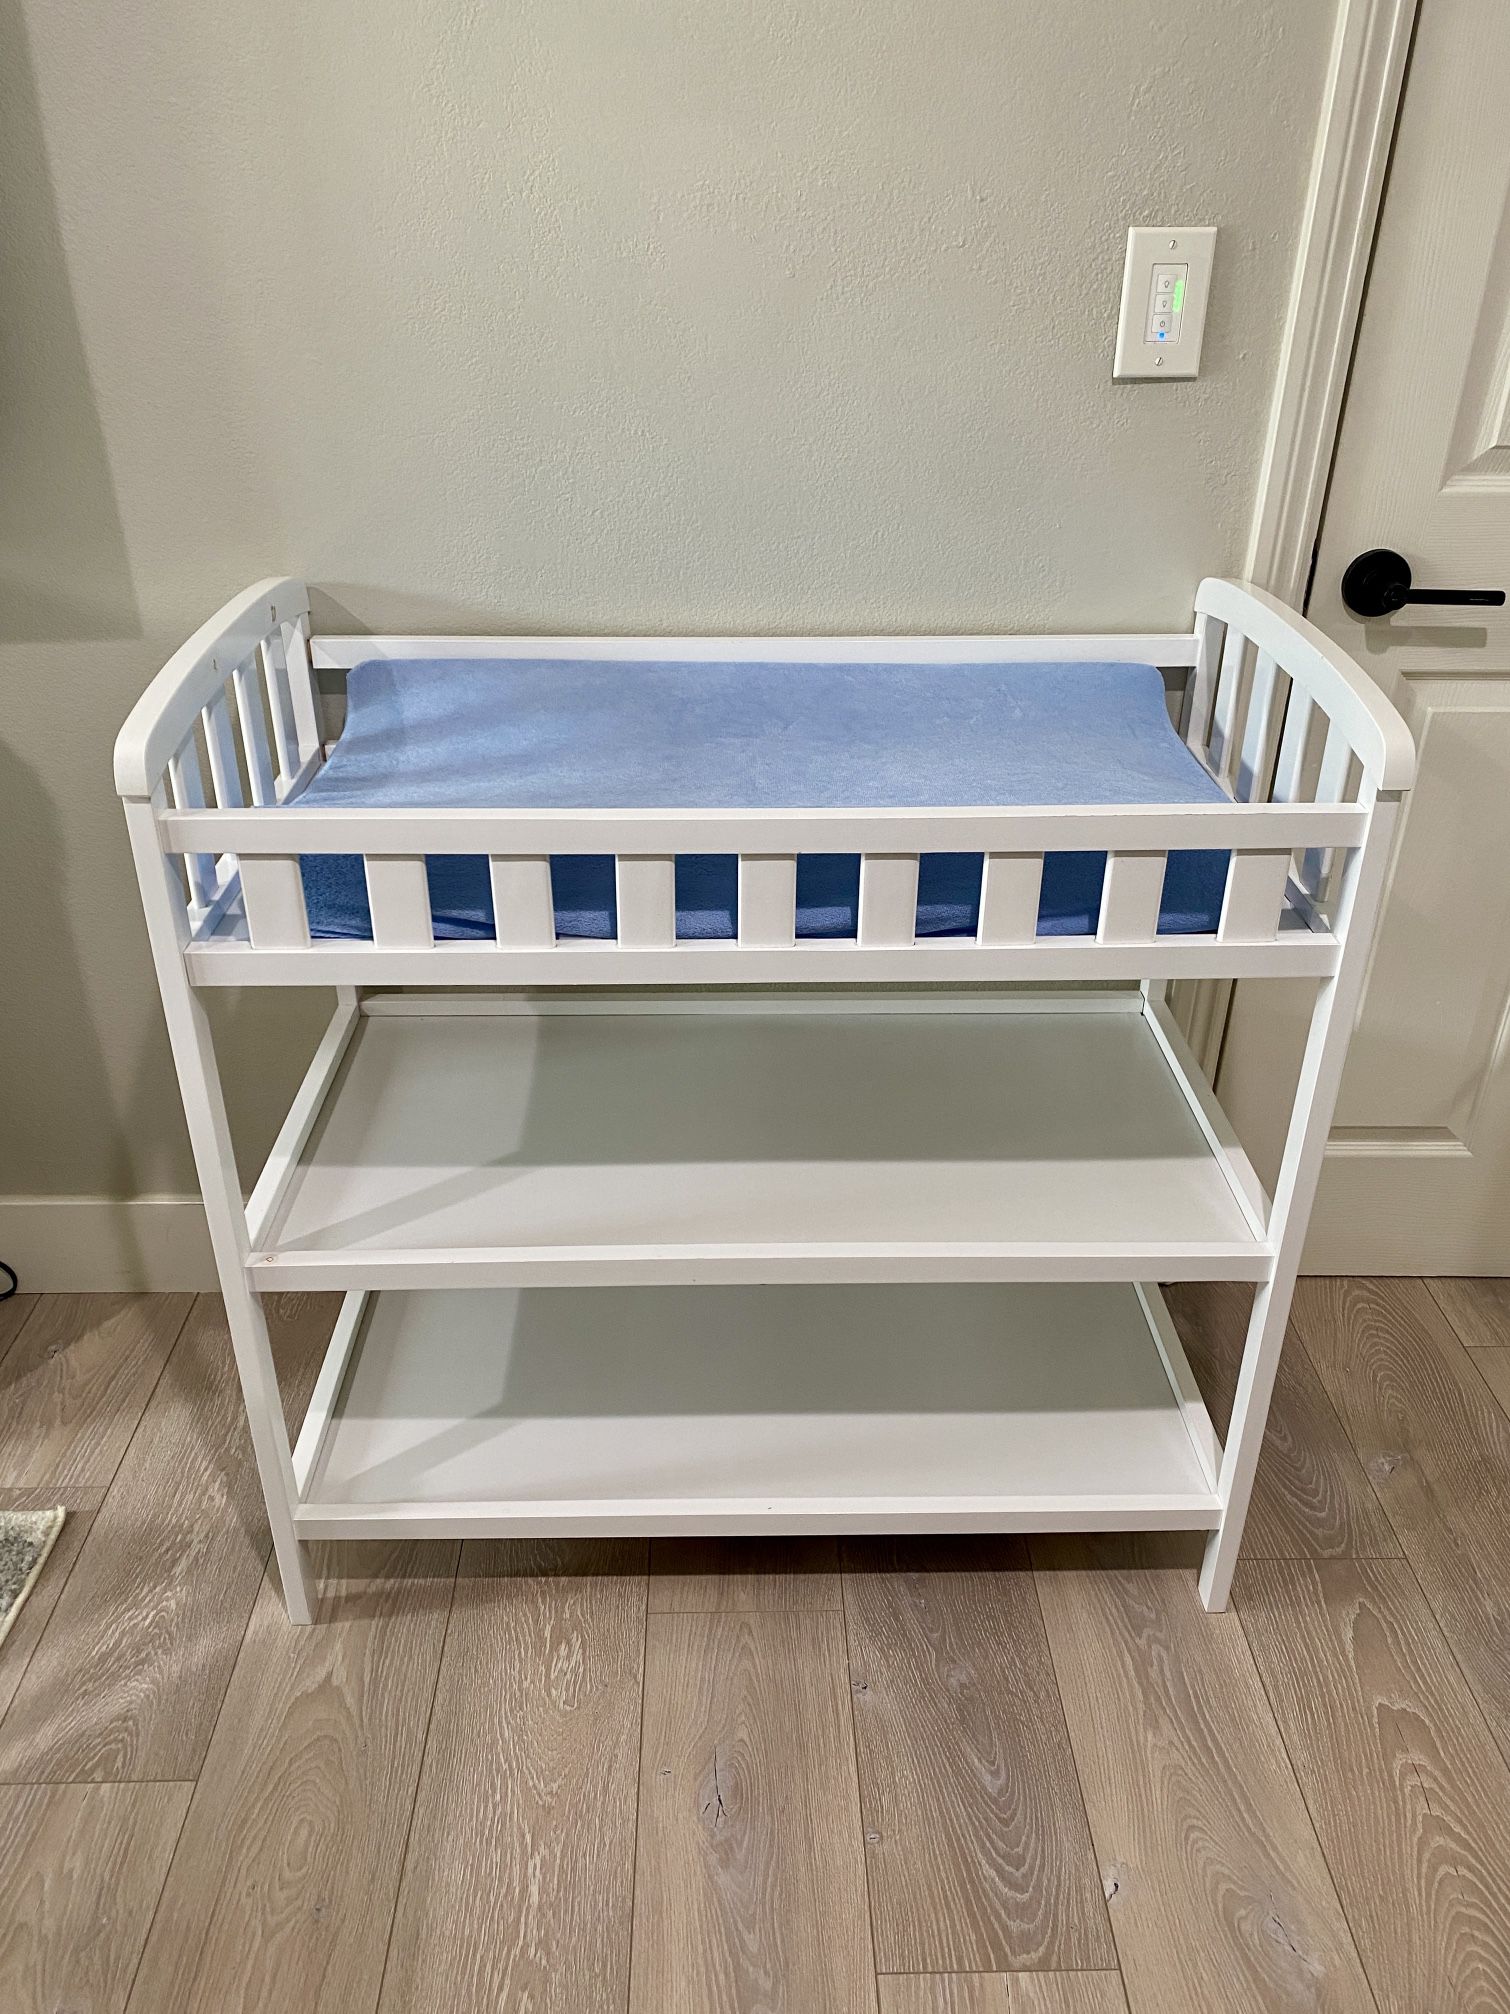 Changing Table (pad included)